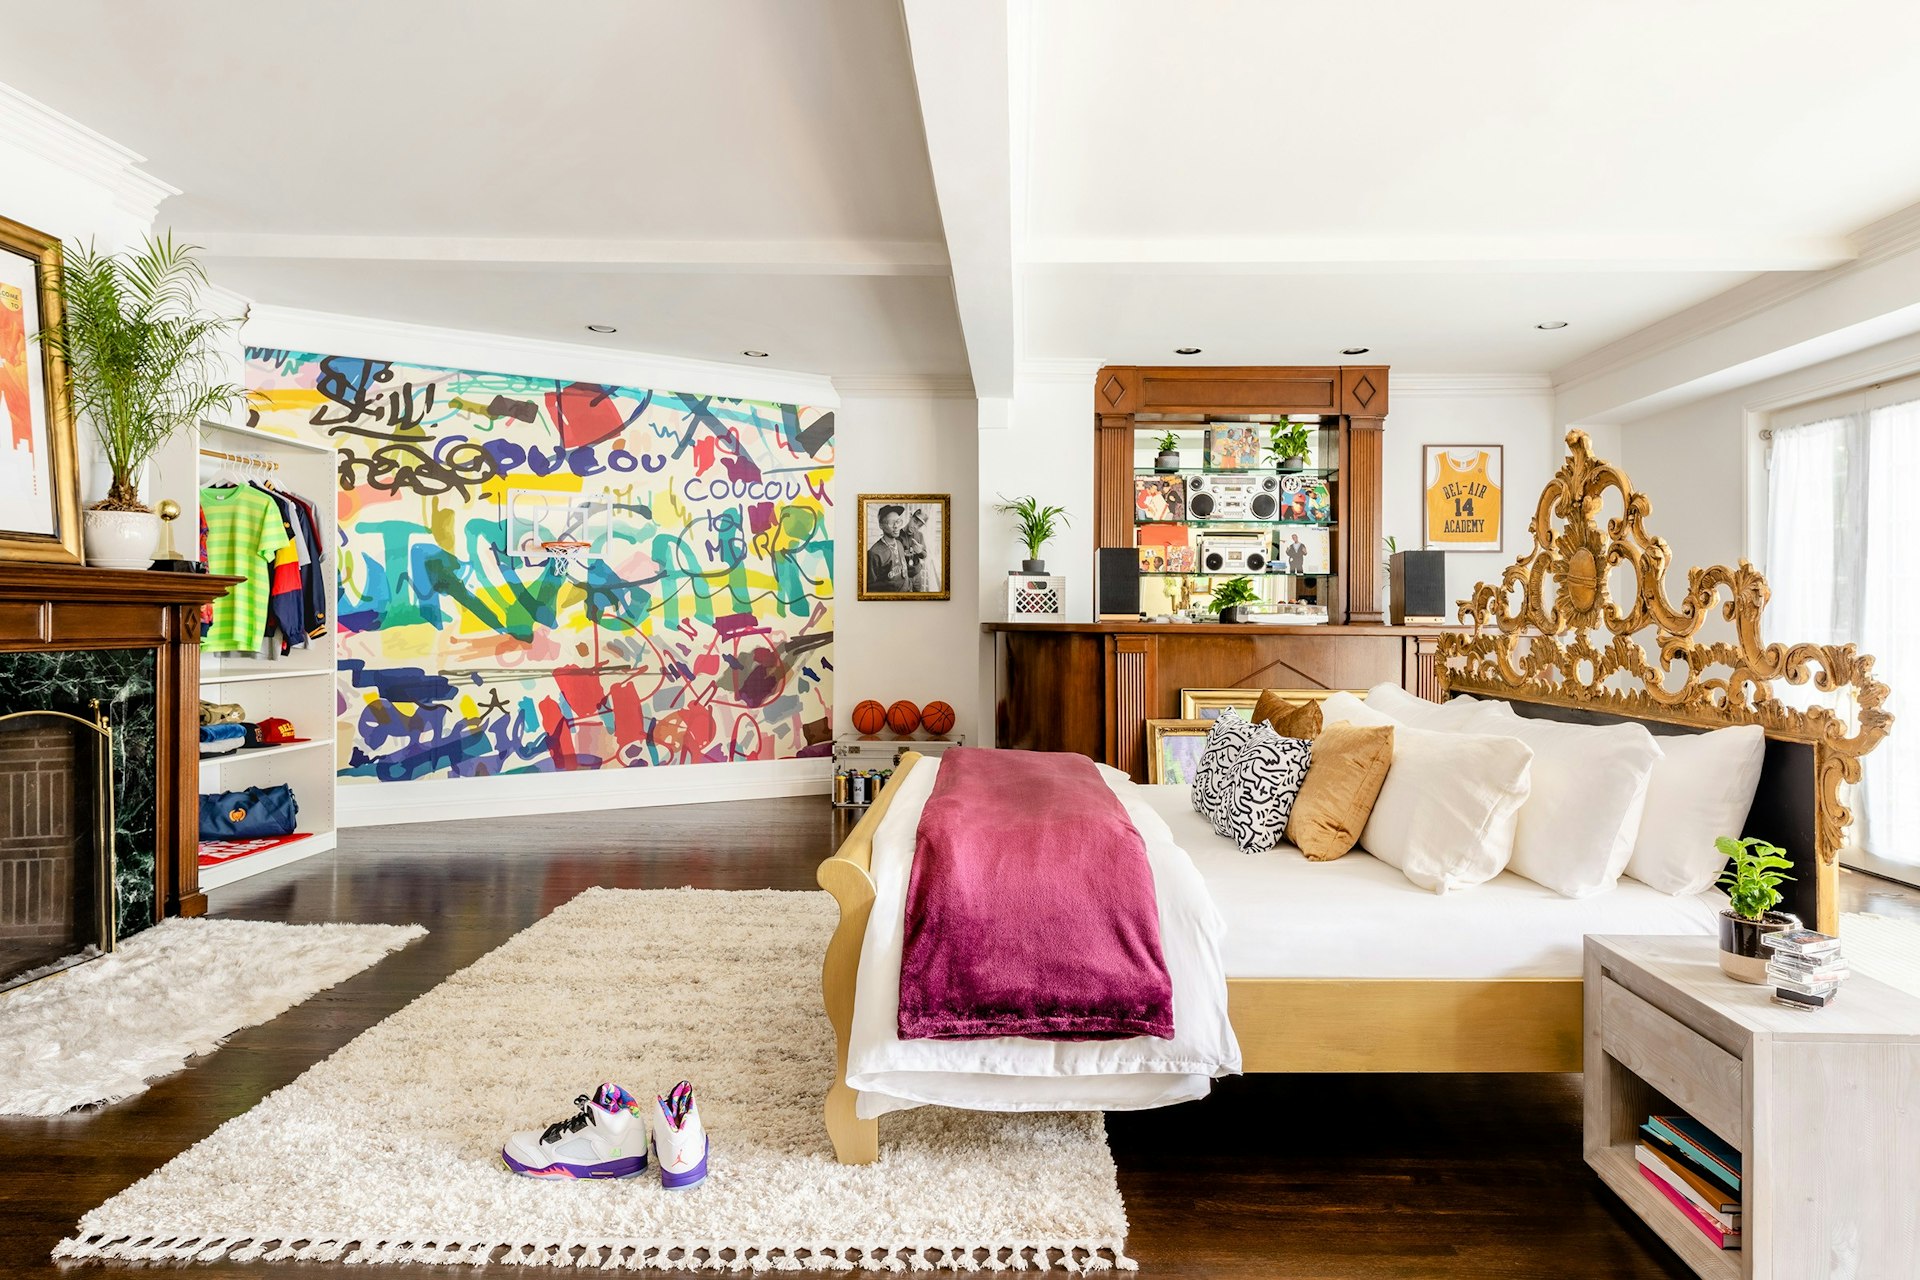 The bedroom at the Fresh Prince of Bel Air mansion